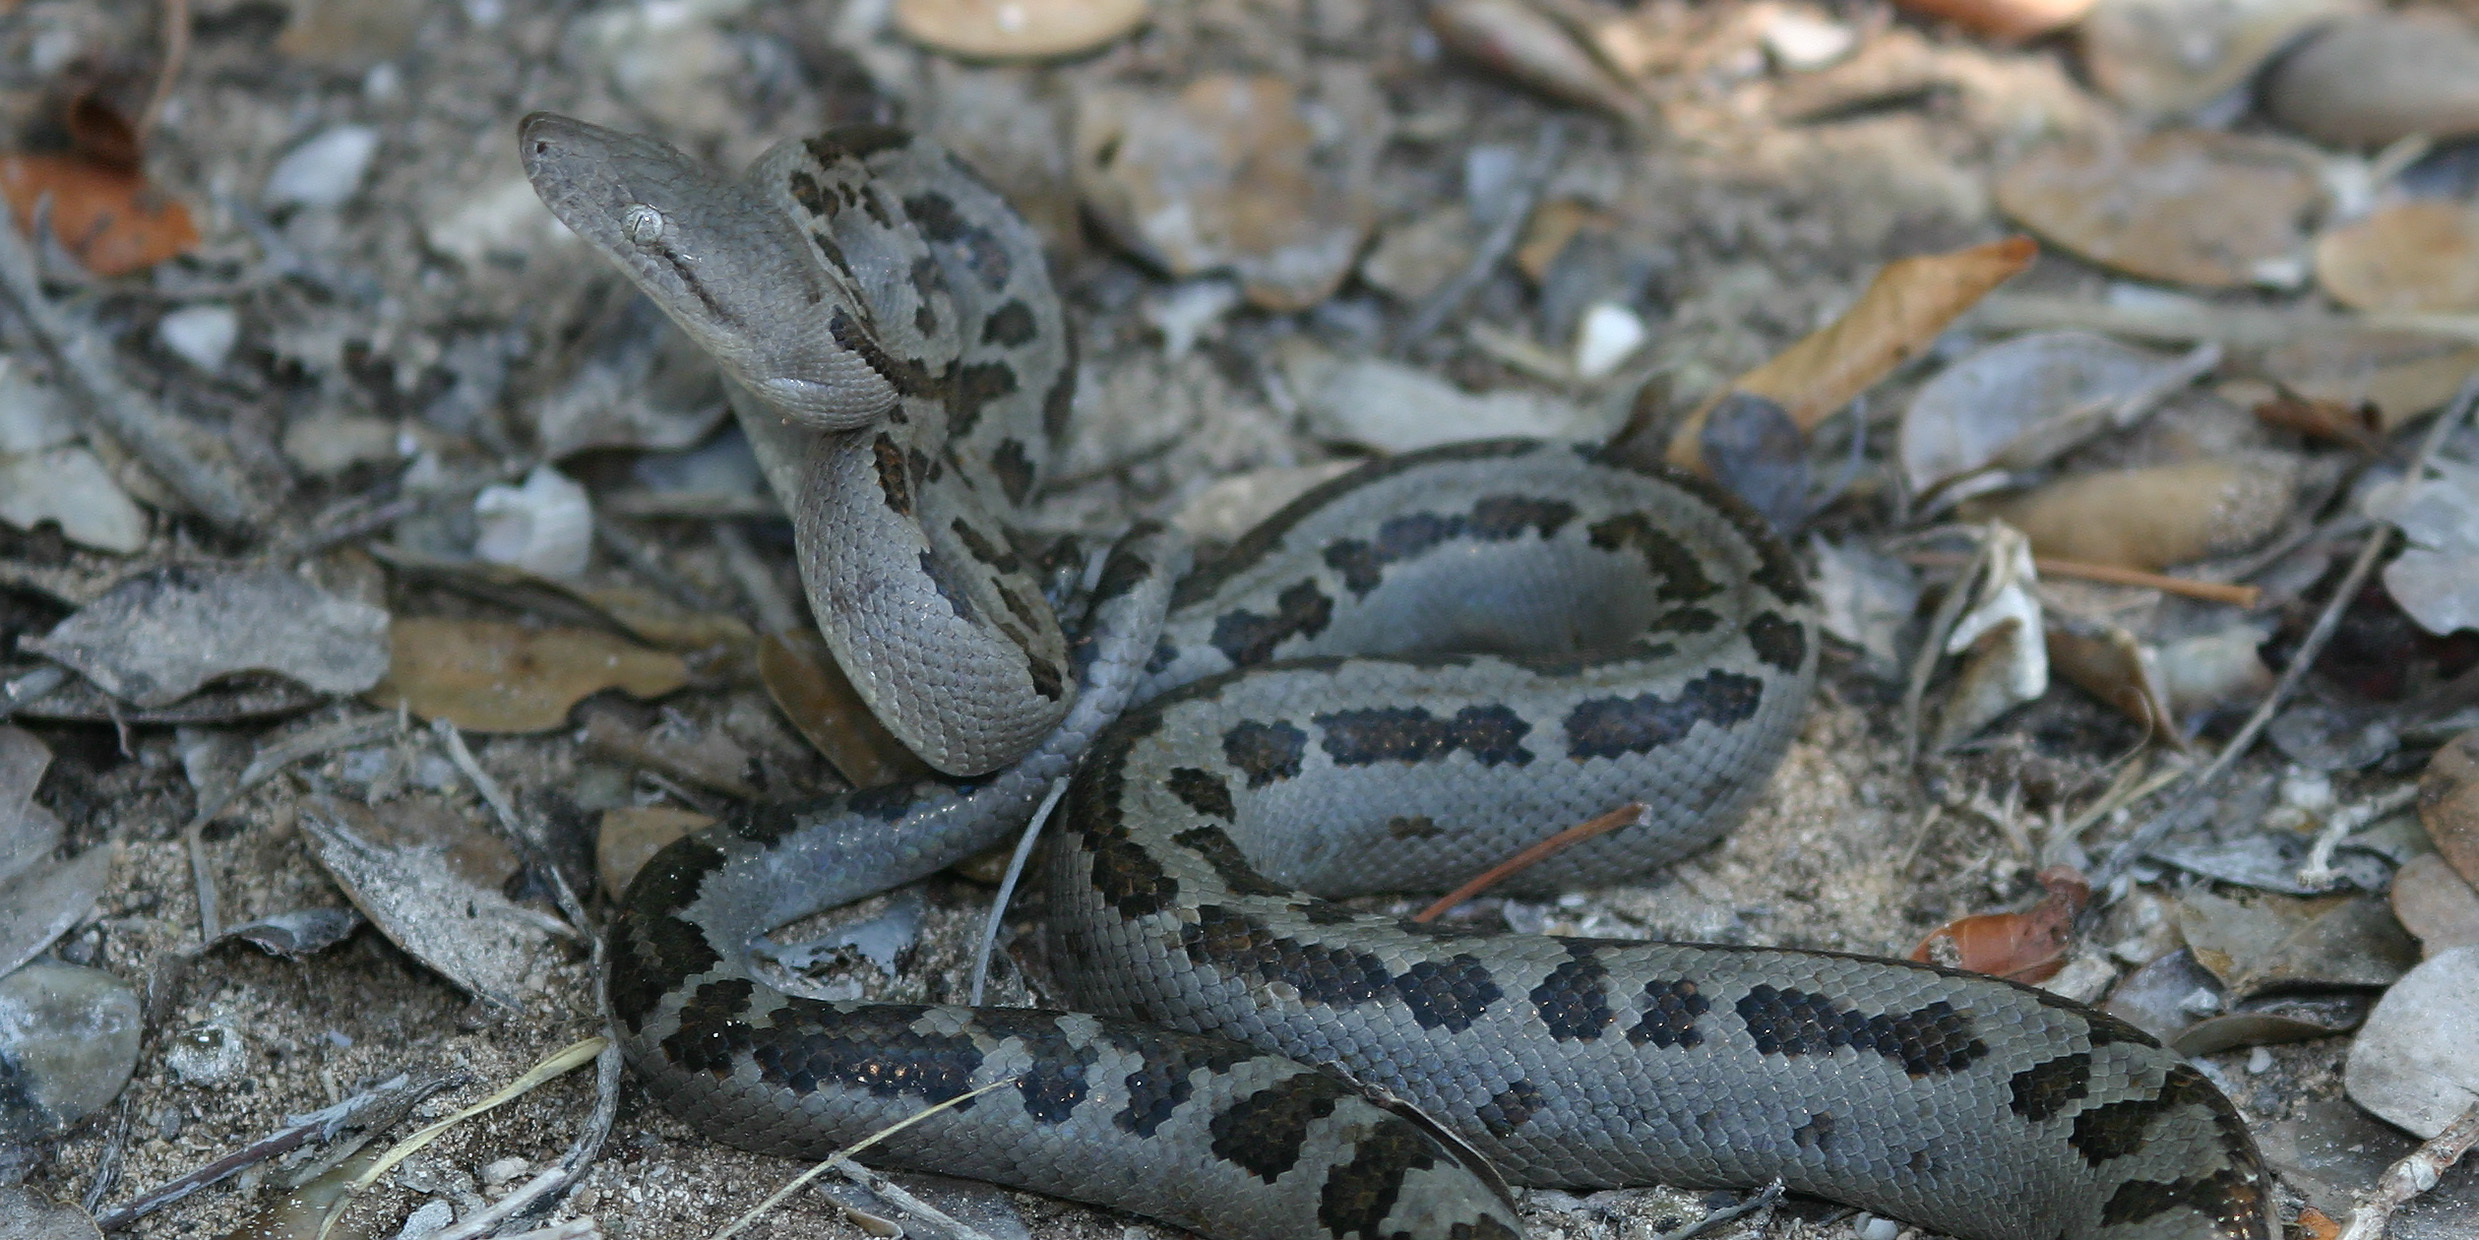 Image of a large boa constrictor coiled on the ground